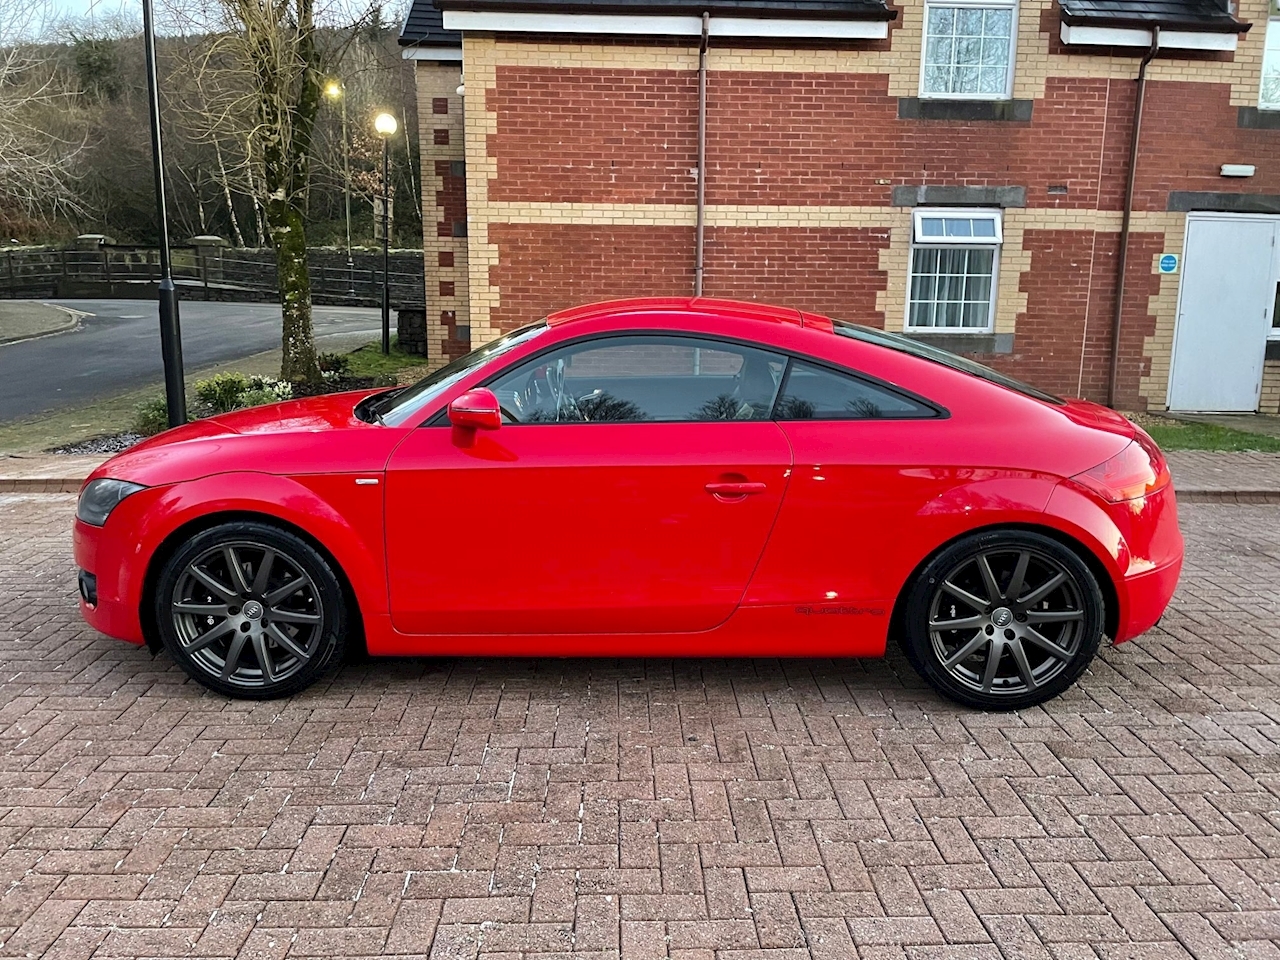 2.0 TFSI Coupe 3dr Petrol Manual (Exclusive Line) (183 g/km, 197 bhp)